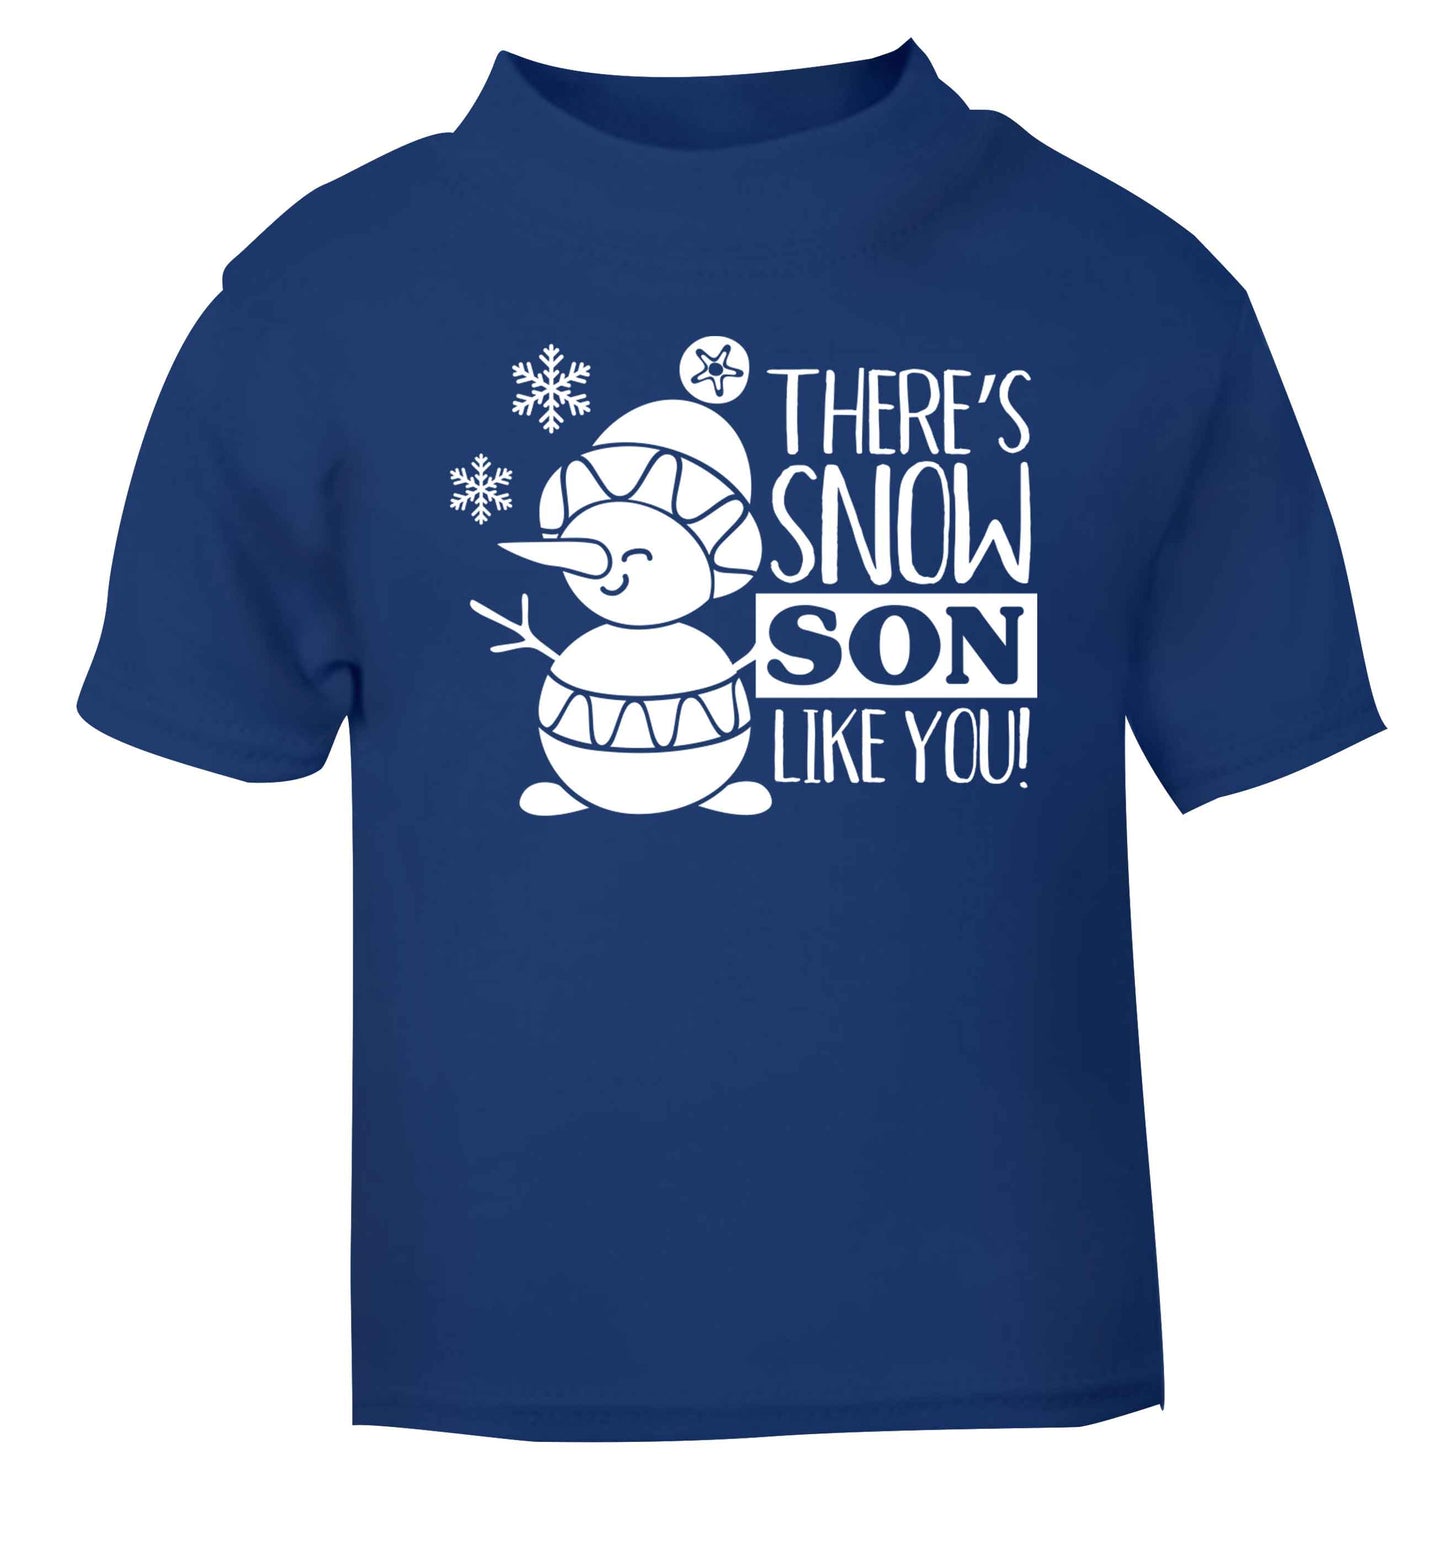 There's snow son like you blue baby toddler Tshirt 2 Years